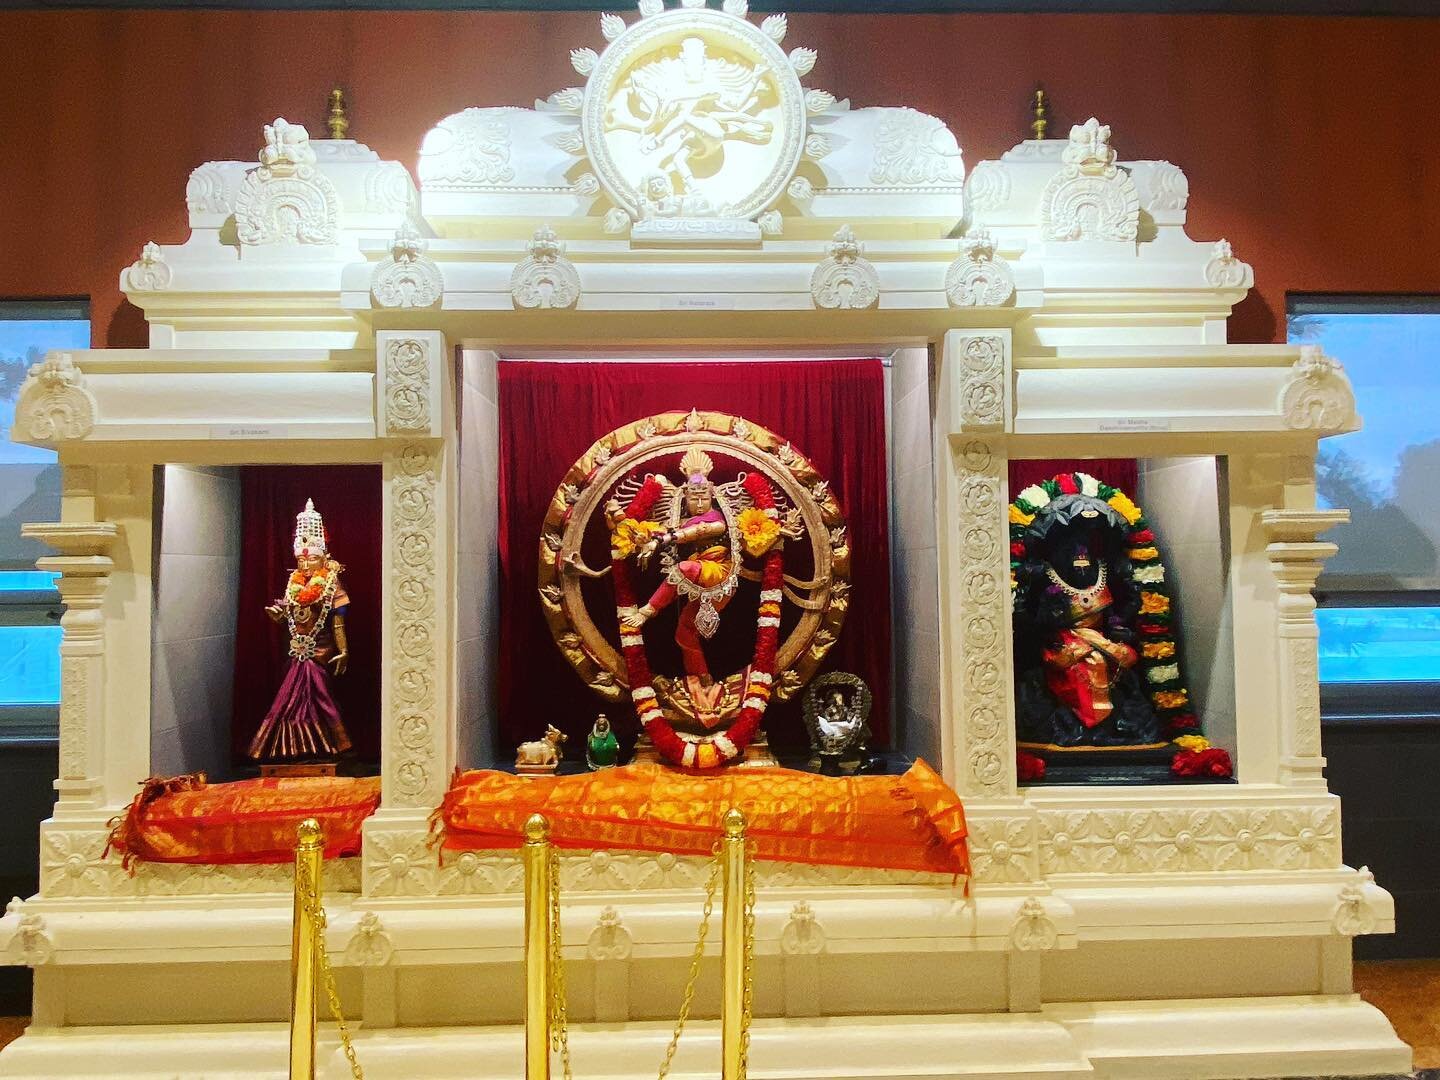 Mothers Day outing at the Ganesha Hindu Temple 

#ganesha #hindu #temple